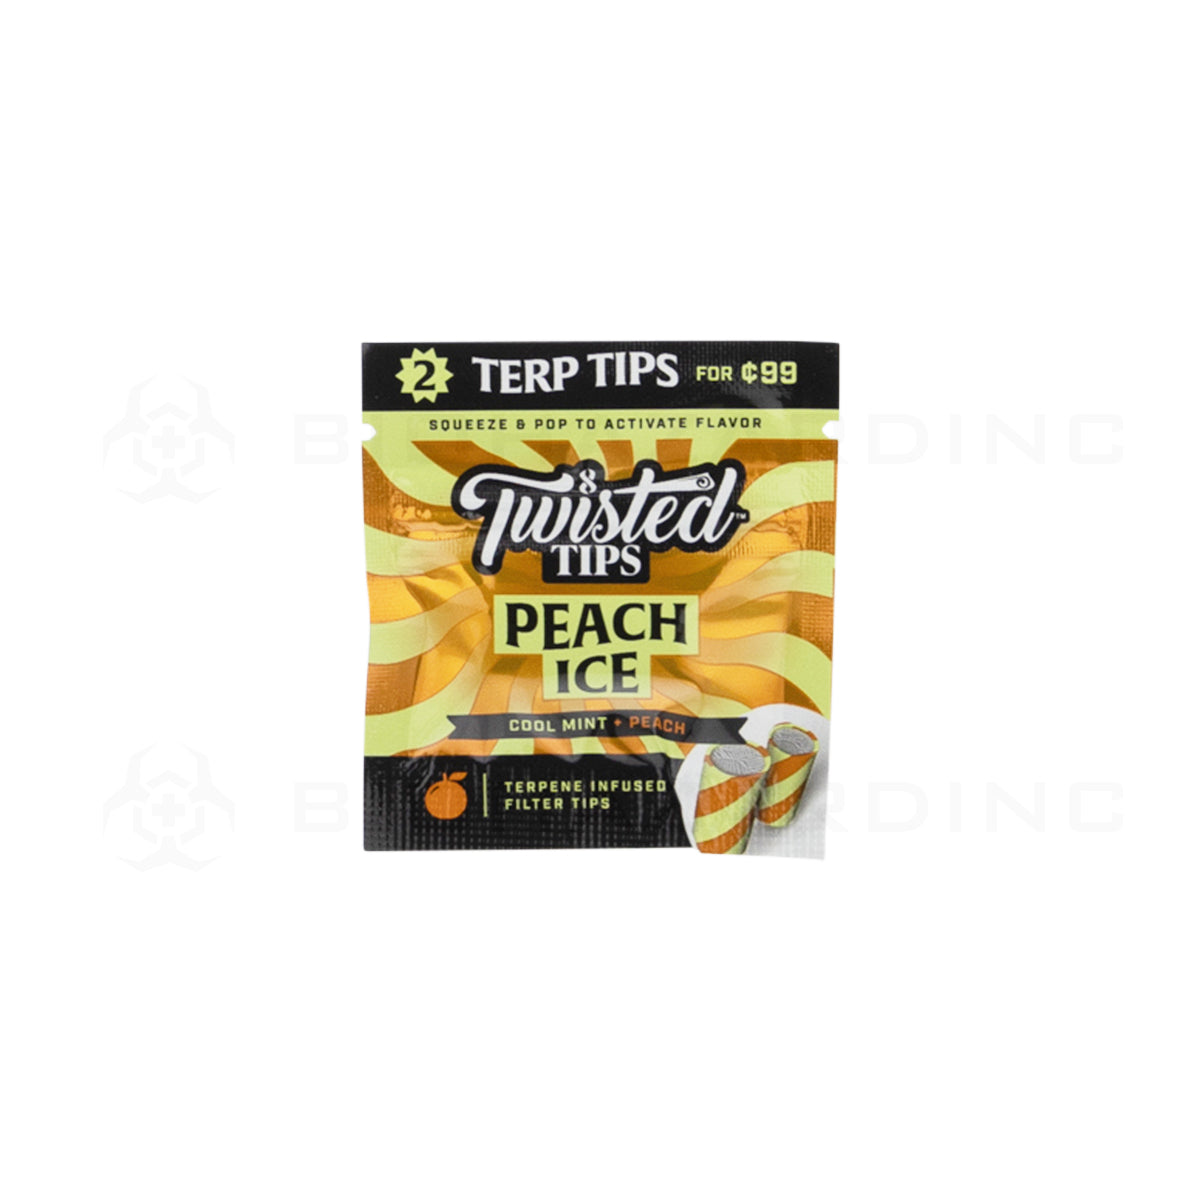 Twisted Tips | 'Retail Display' Terpene Infused 2 Packs | 24 Count Paper Tips Twisted Hemp Peach Ice  